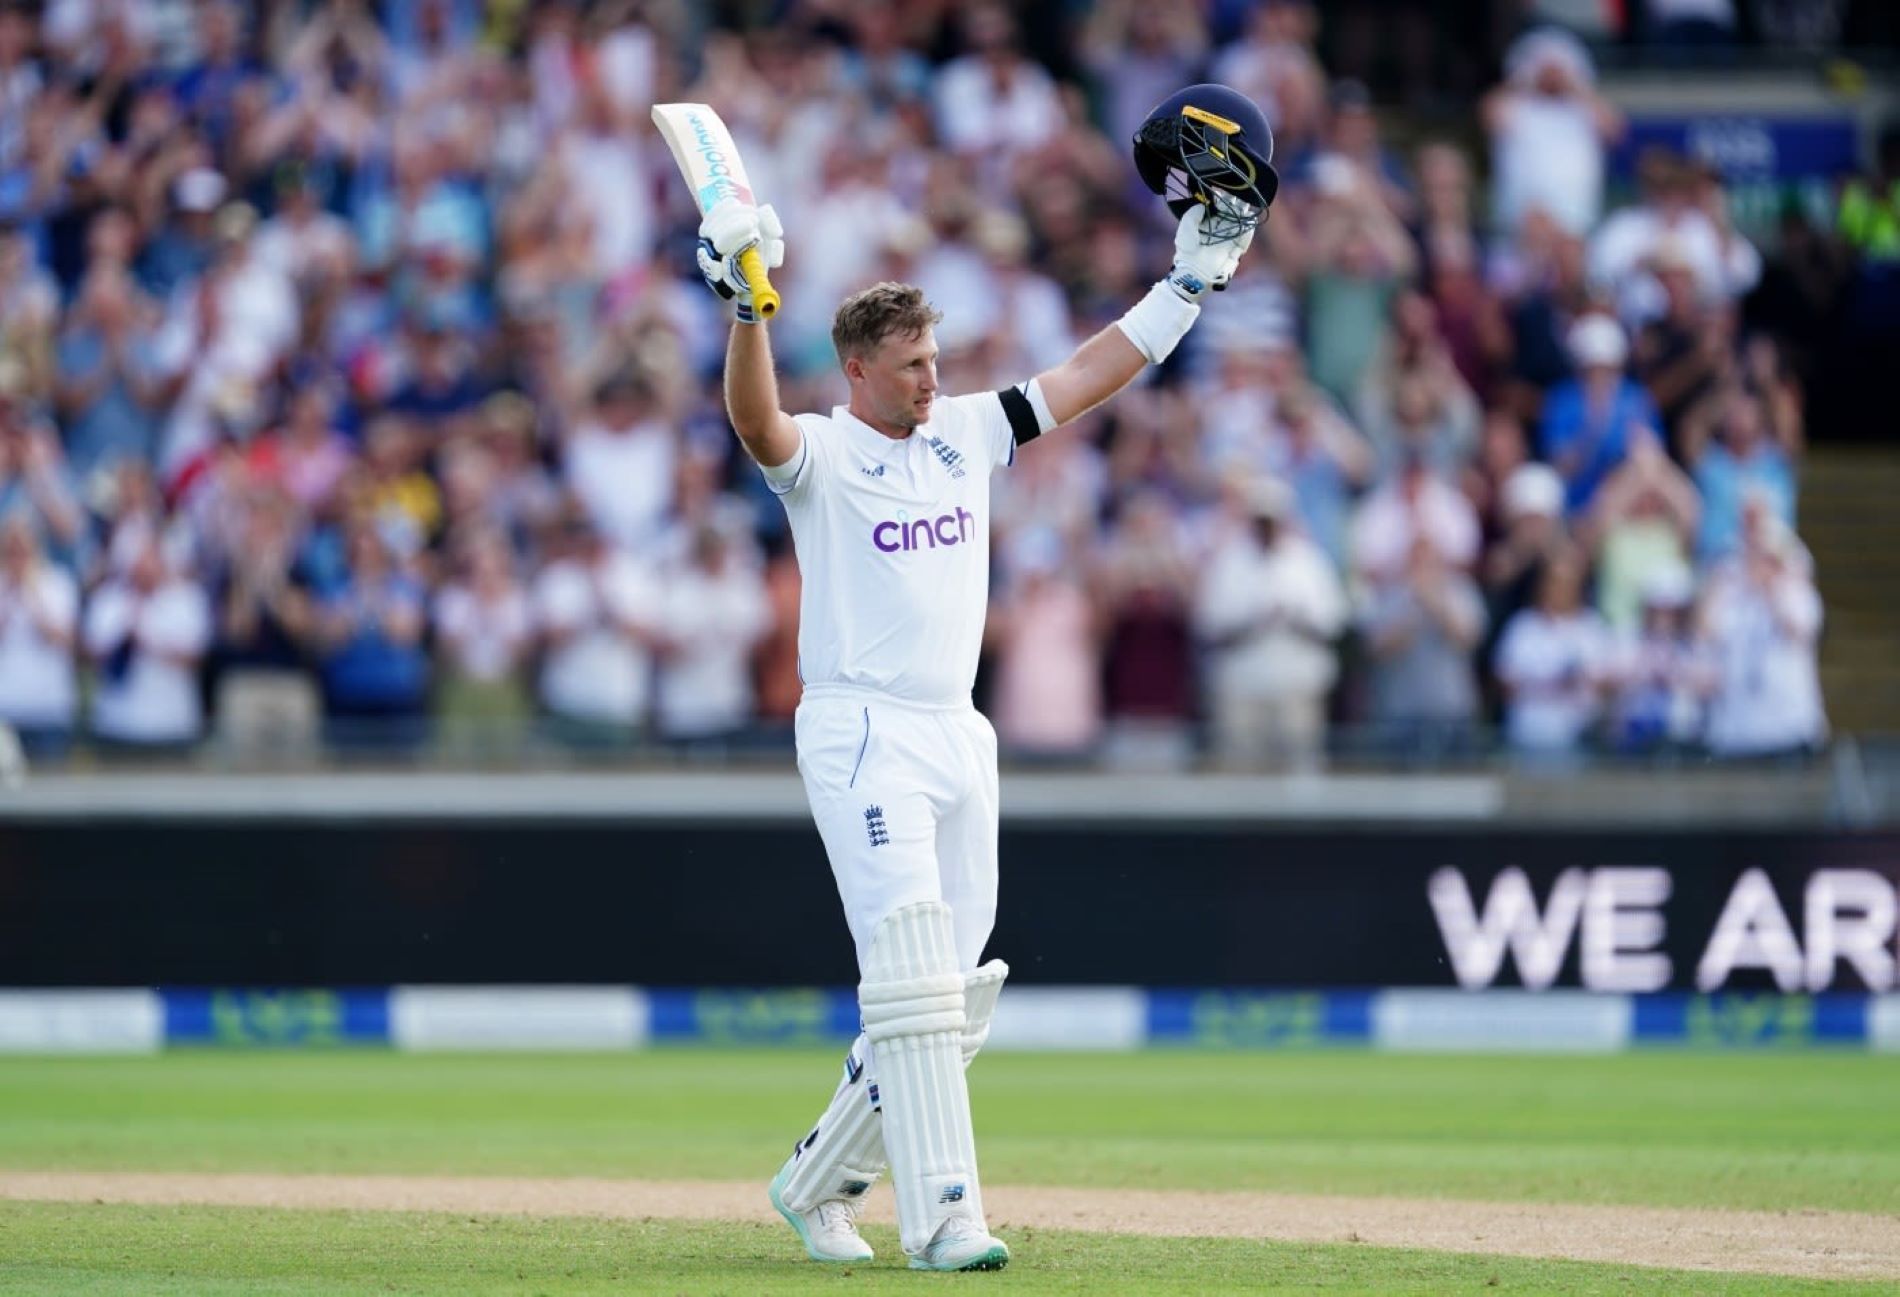 Joe Root will be looking to score big in his home ground at Headingley